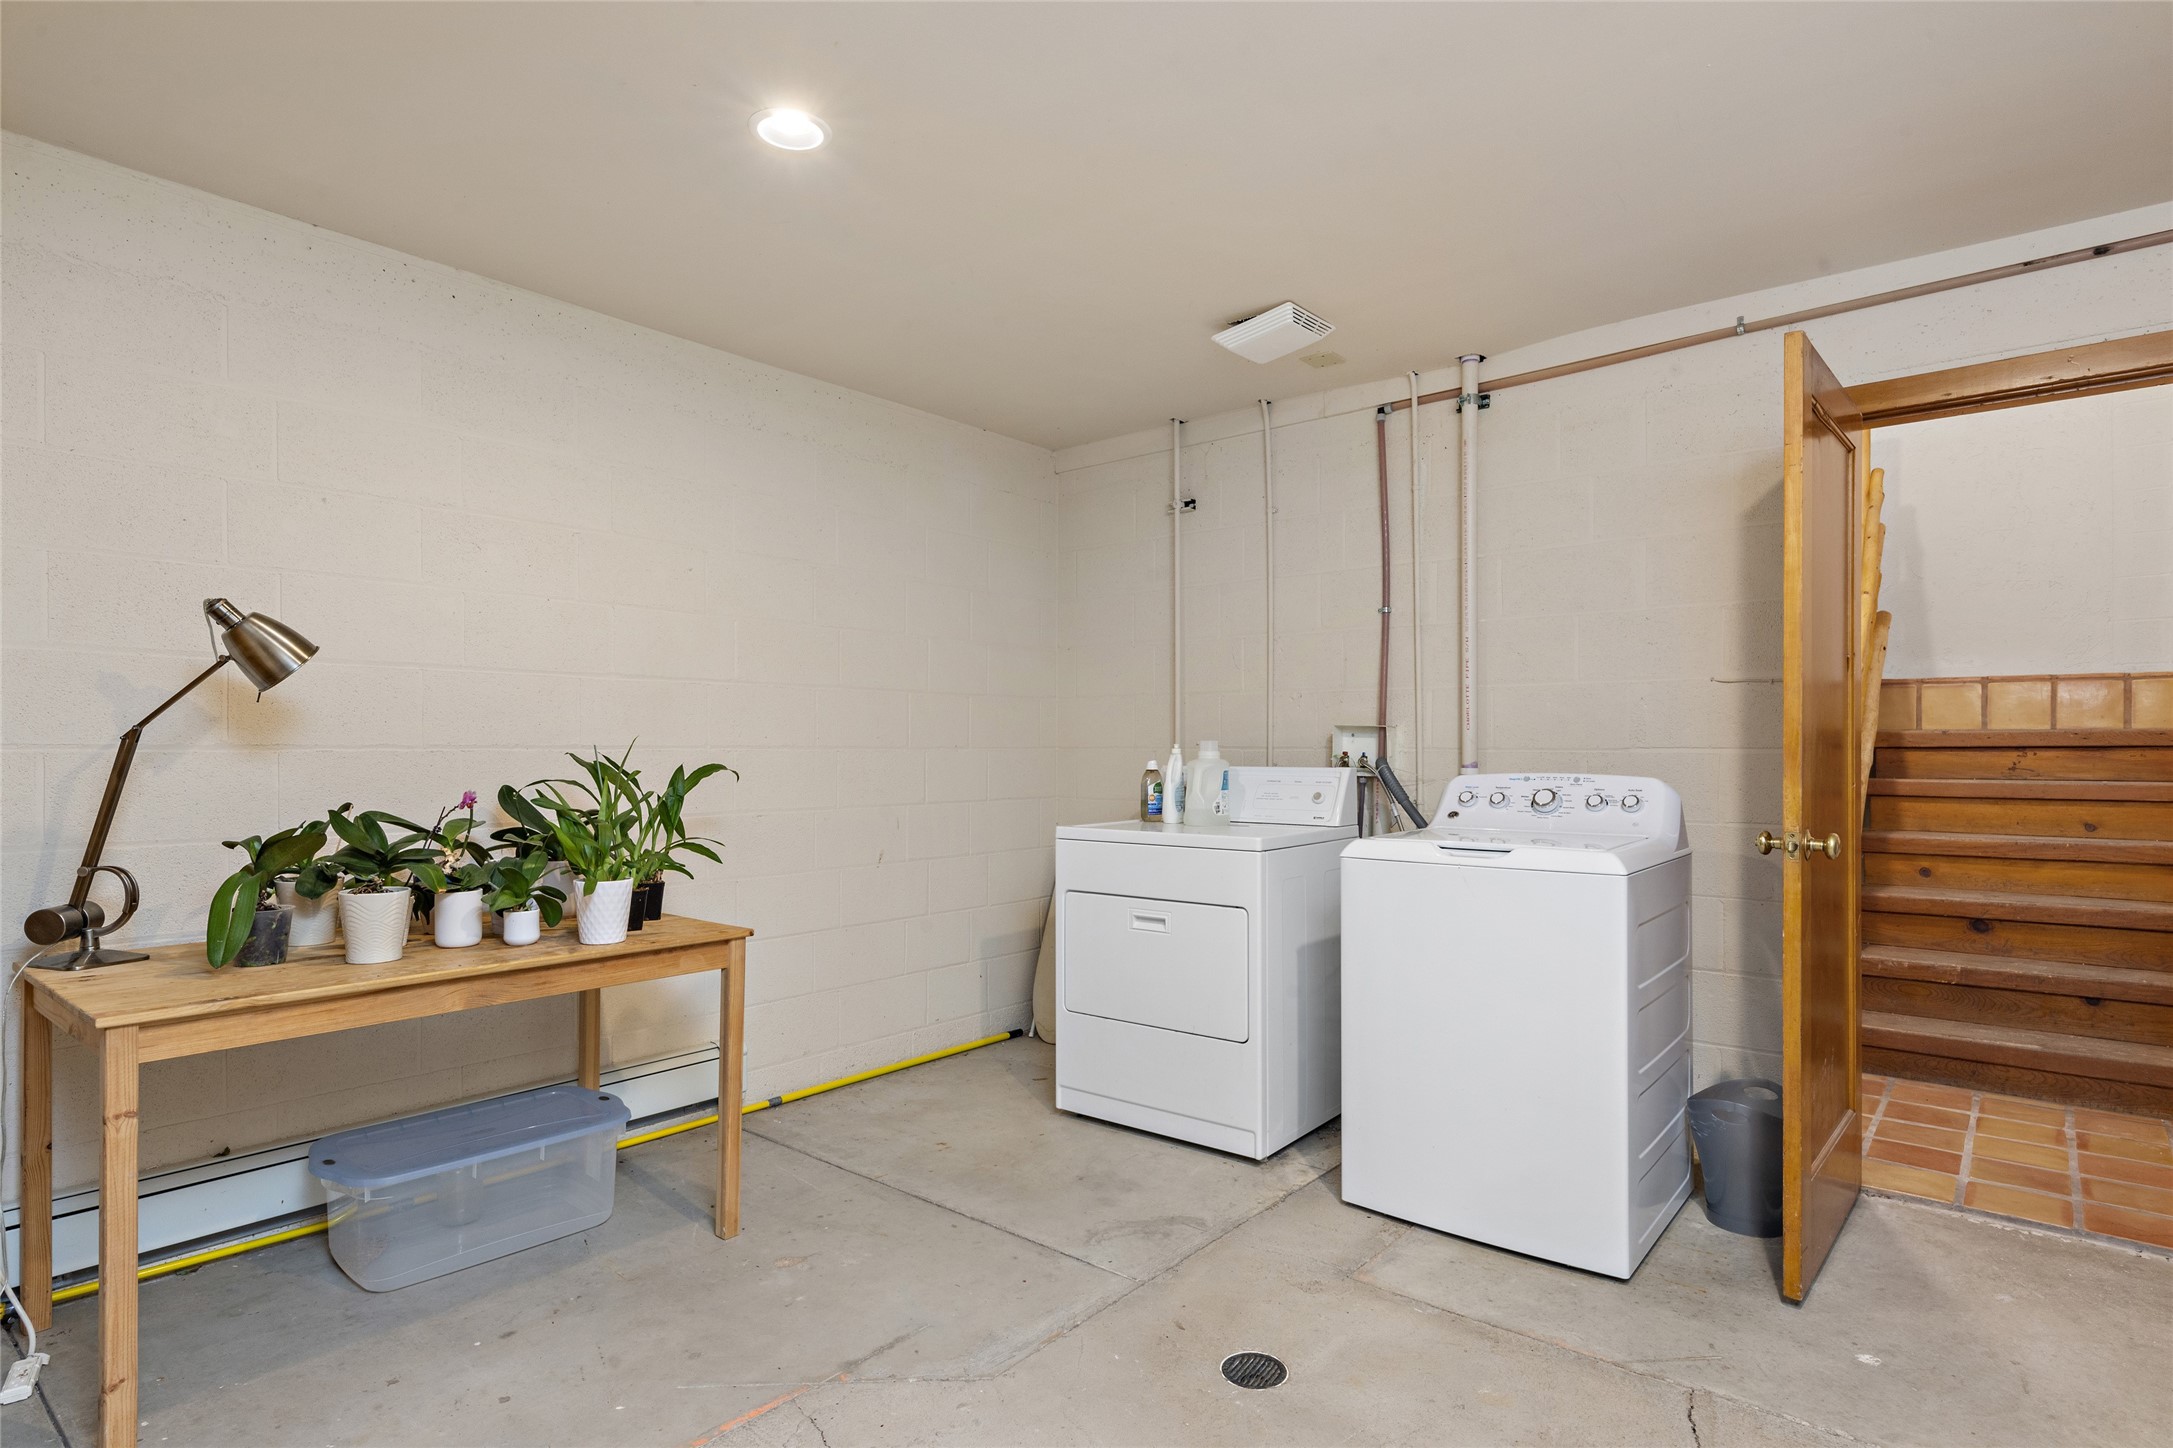 Laundry room and Utility room